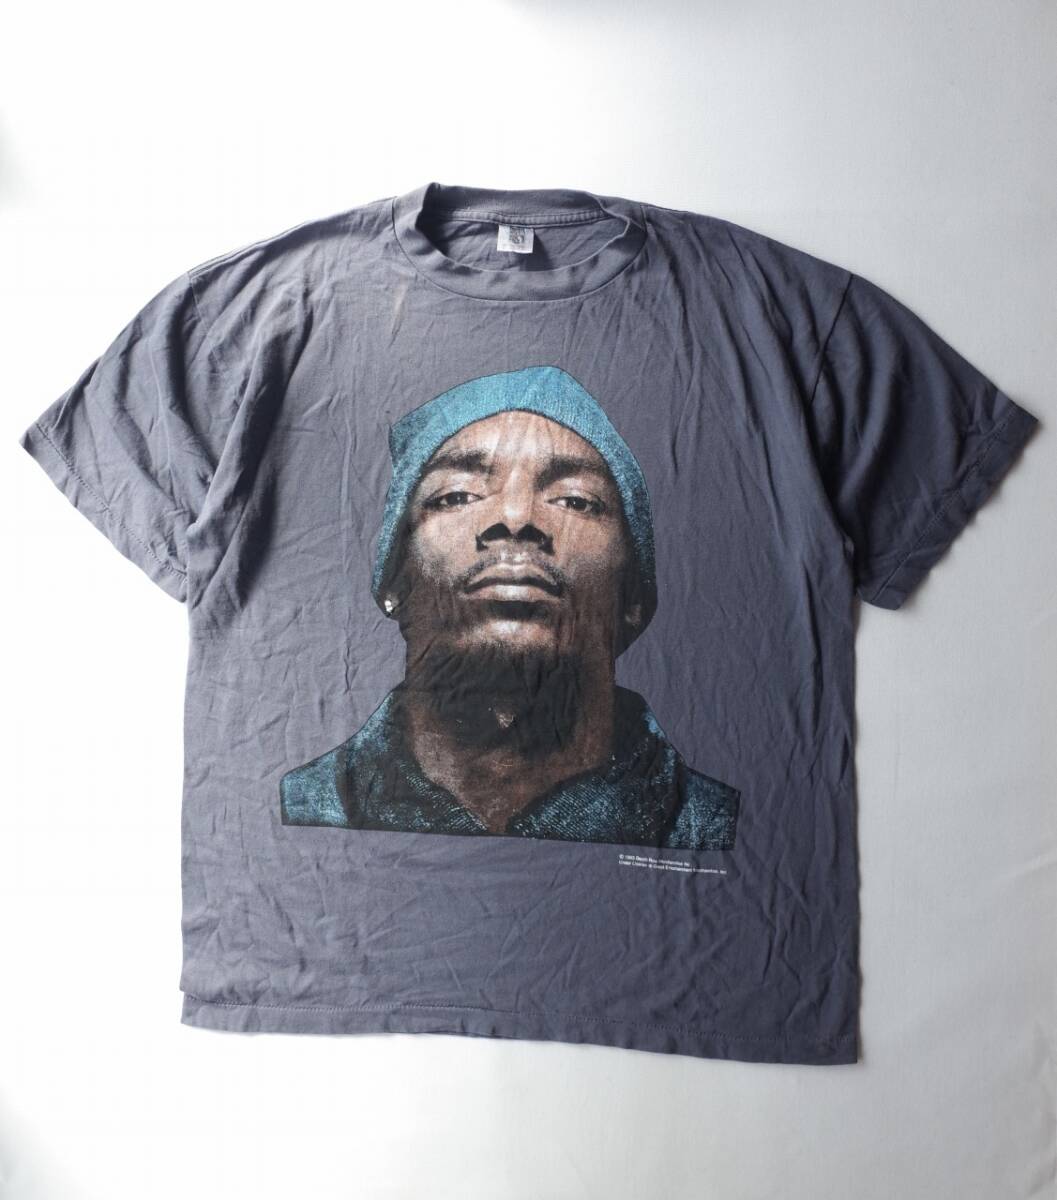 90's-00's USA製　SNOOP DOGG スヌープドッグ　Tシャツ 両面プリント　XL チャコールグレー　アメカジ アメリカ古着　RAP TEE HIPHOP